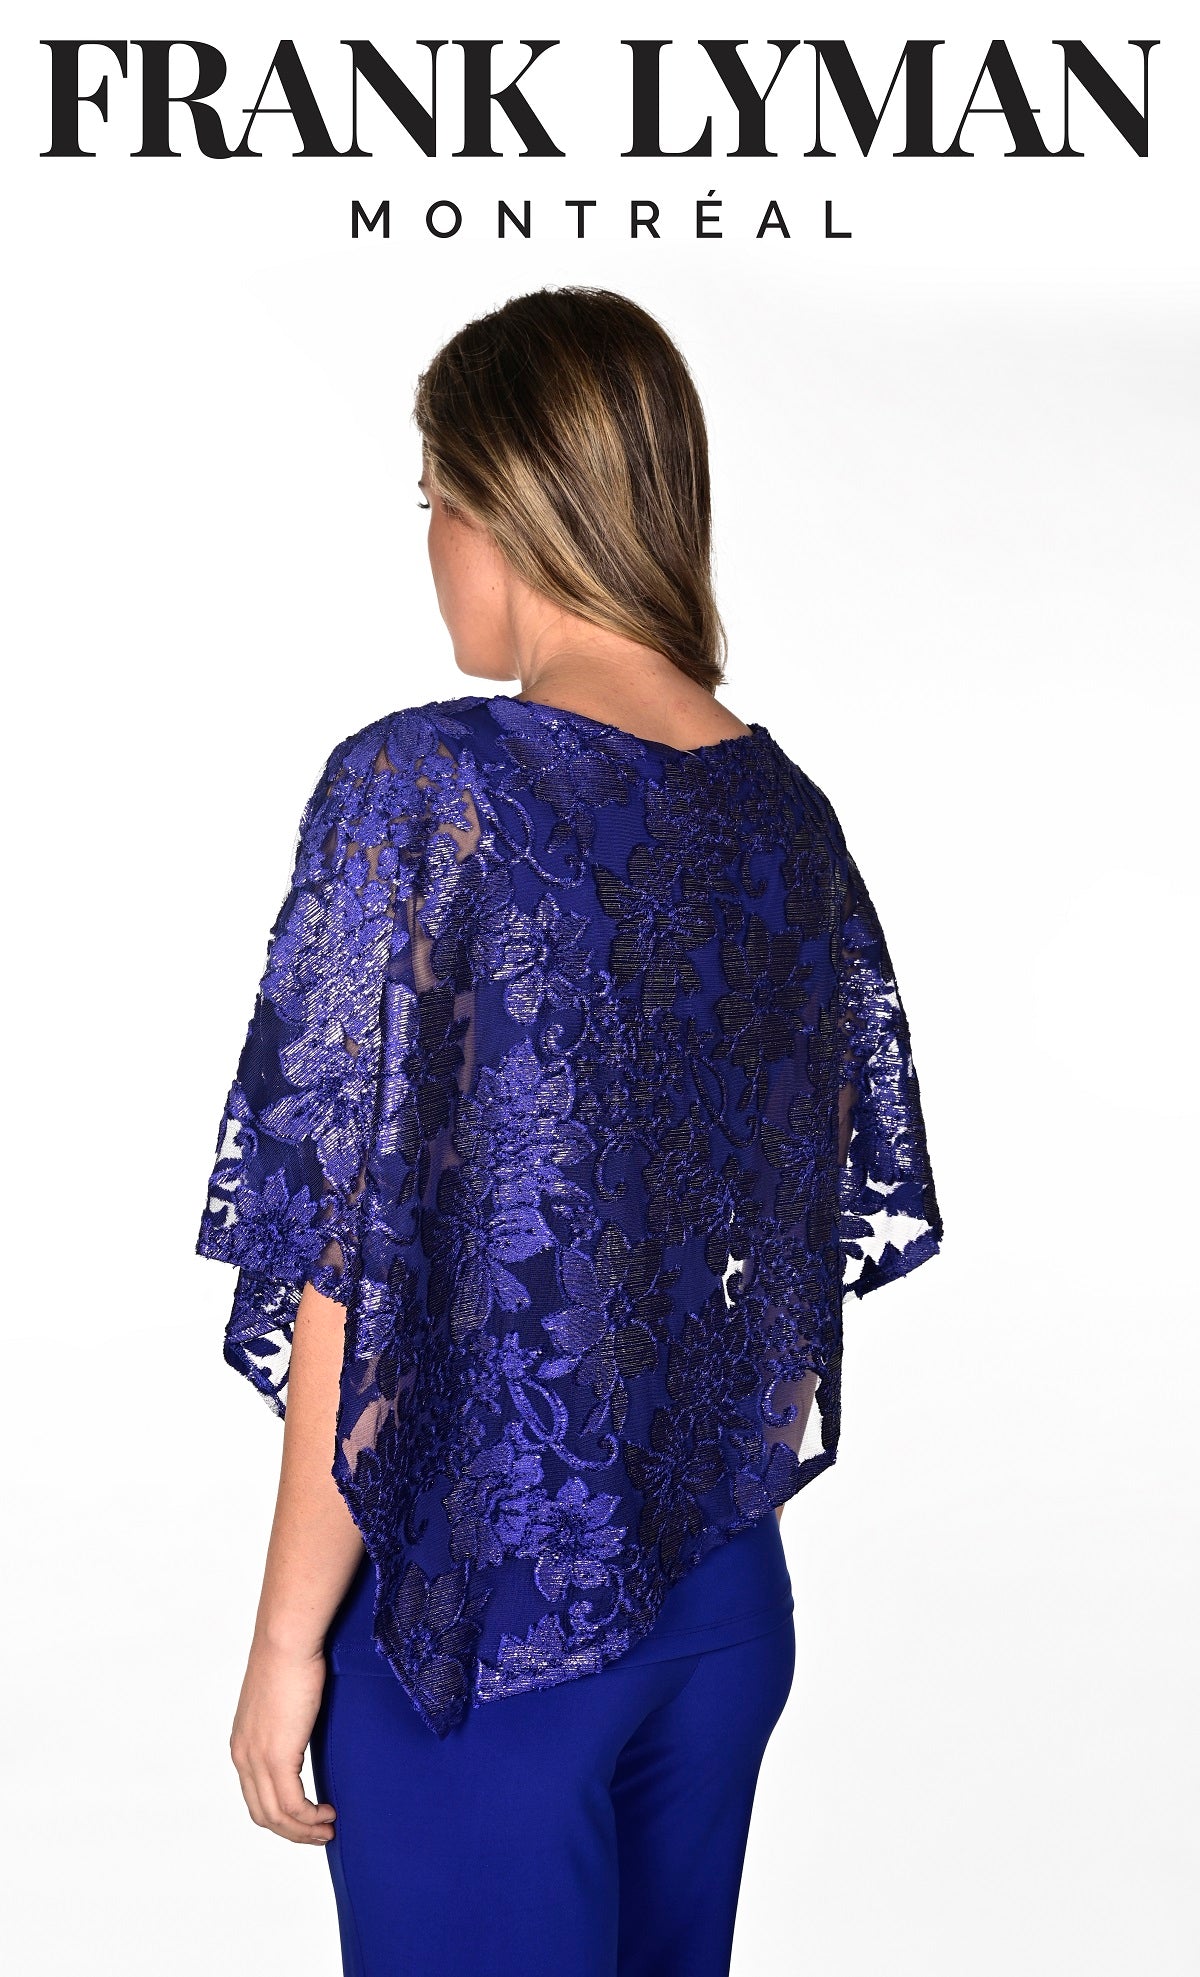 Frank Lyman Montreal Evening Tops-Frank Lyman Montreal Tops-Evening Wear Online-Frank Lyman Montreal Holiday Collection